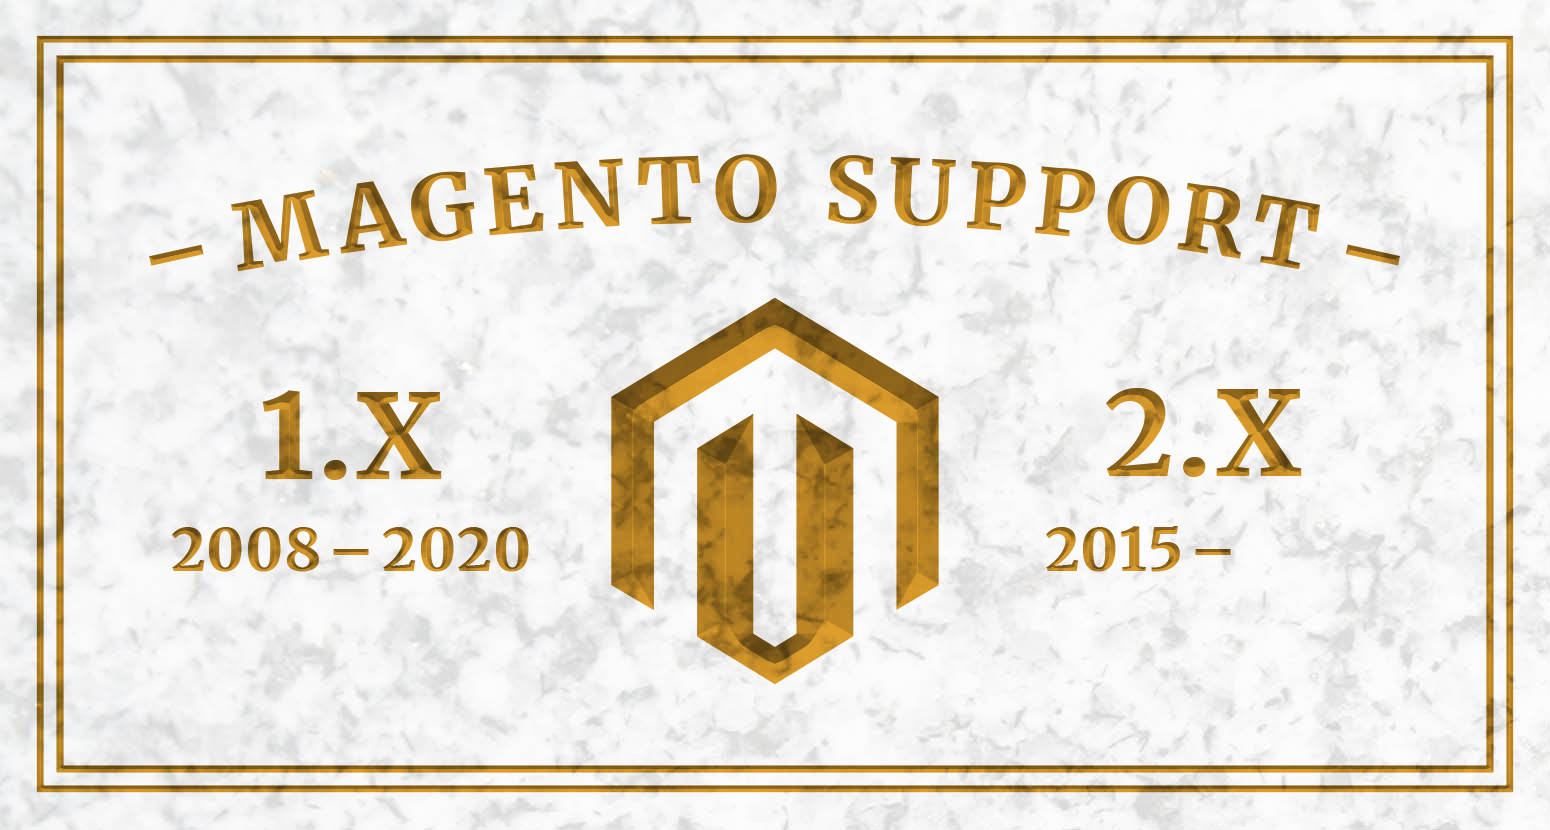 End of Support for Magento 1